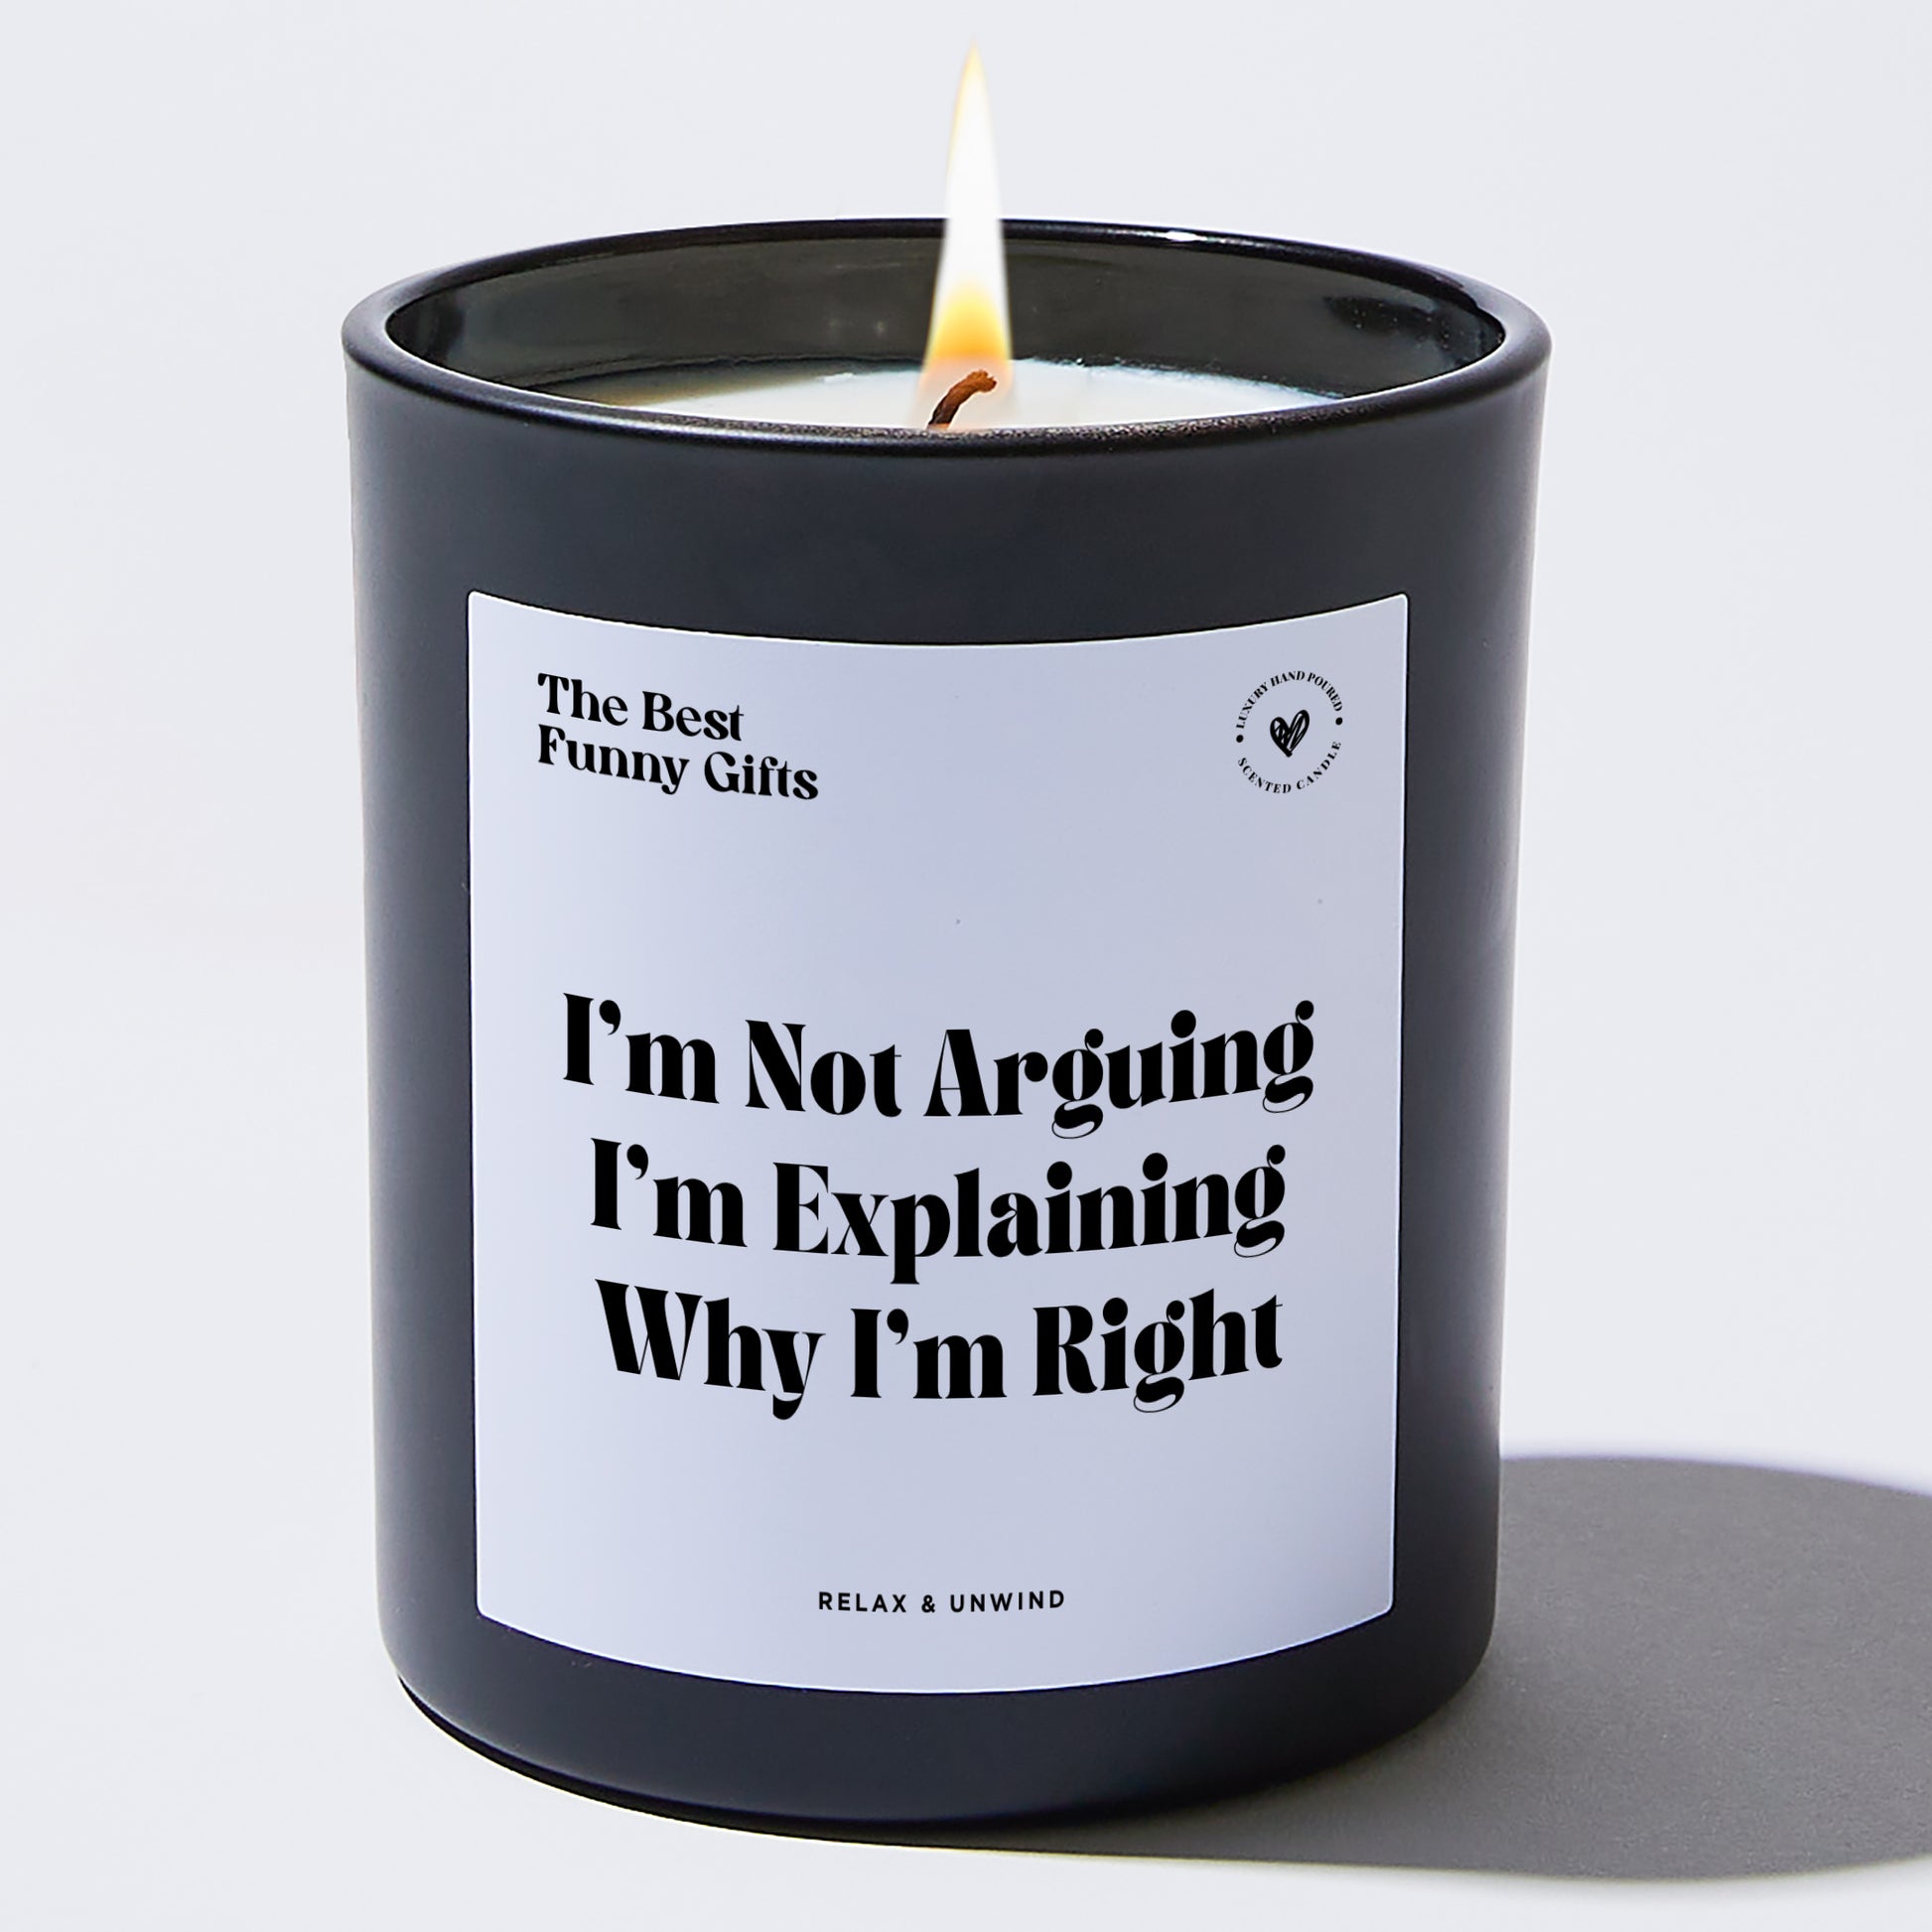 Funny Candle I'm Not Arguing I'm Explaining Why I'm Right - The Best Funny Gifts